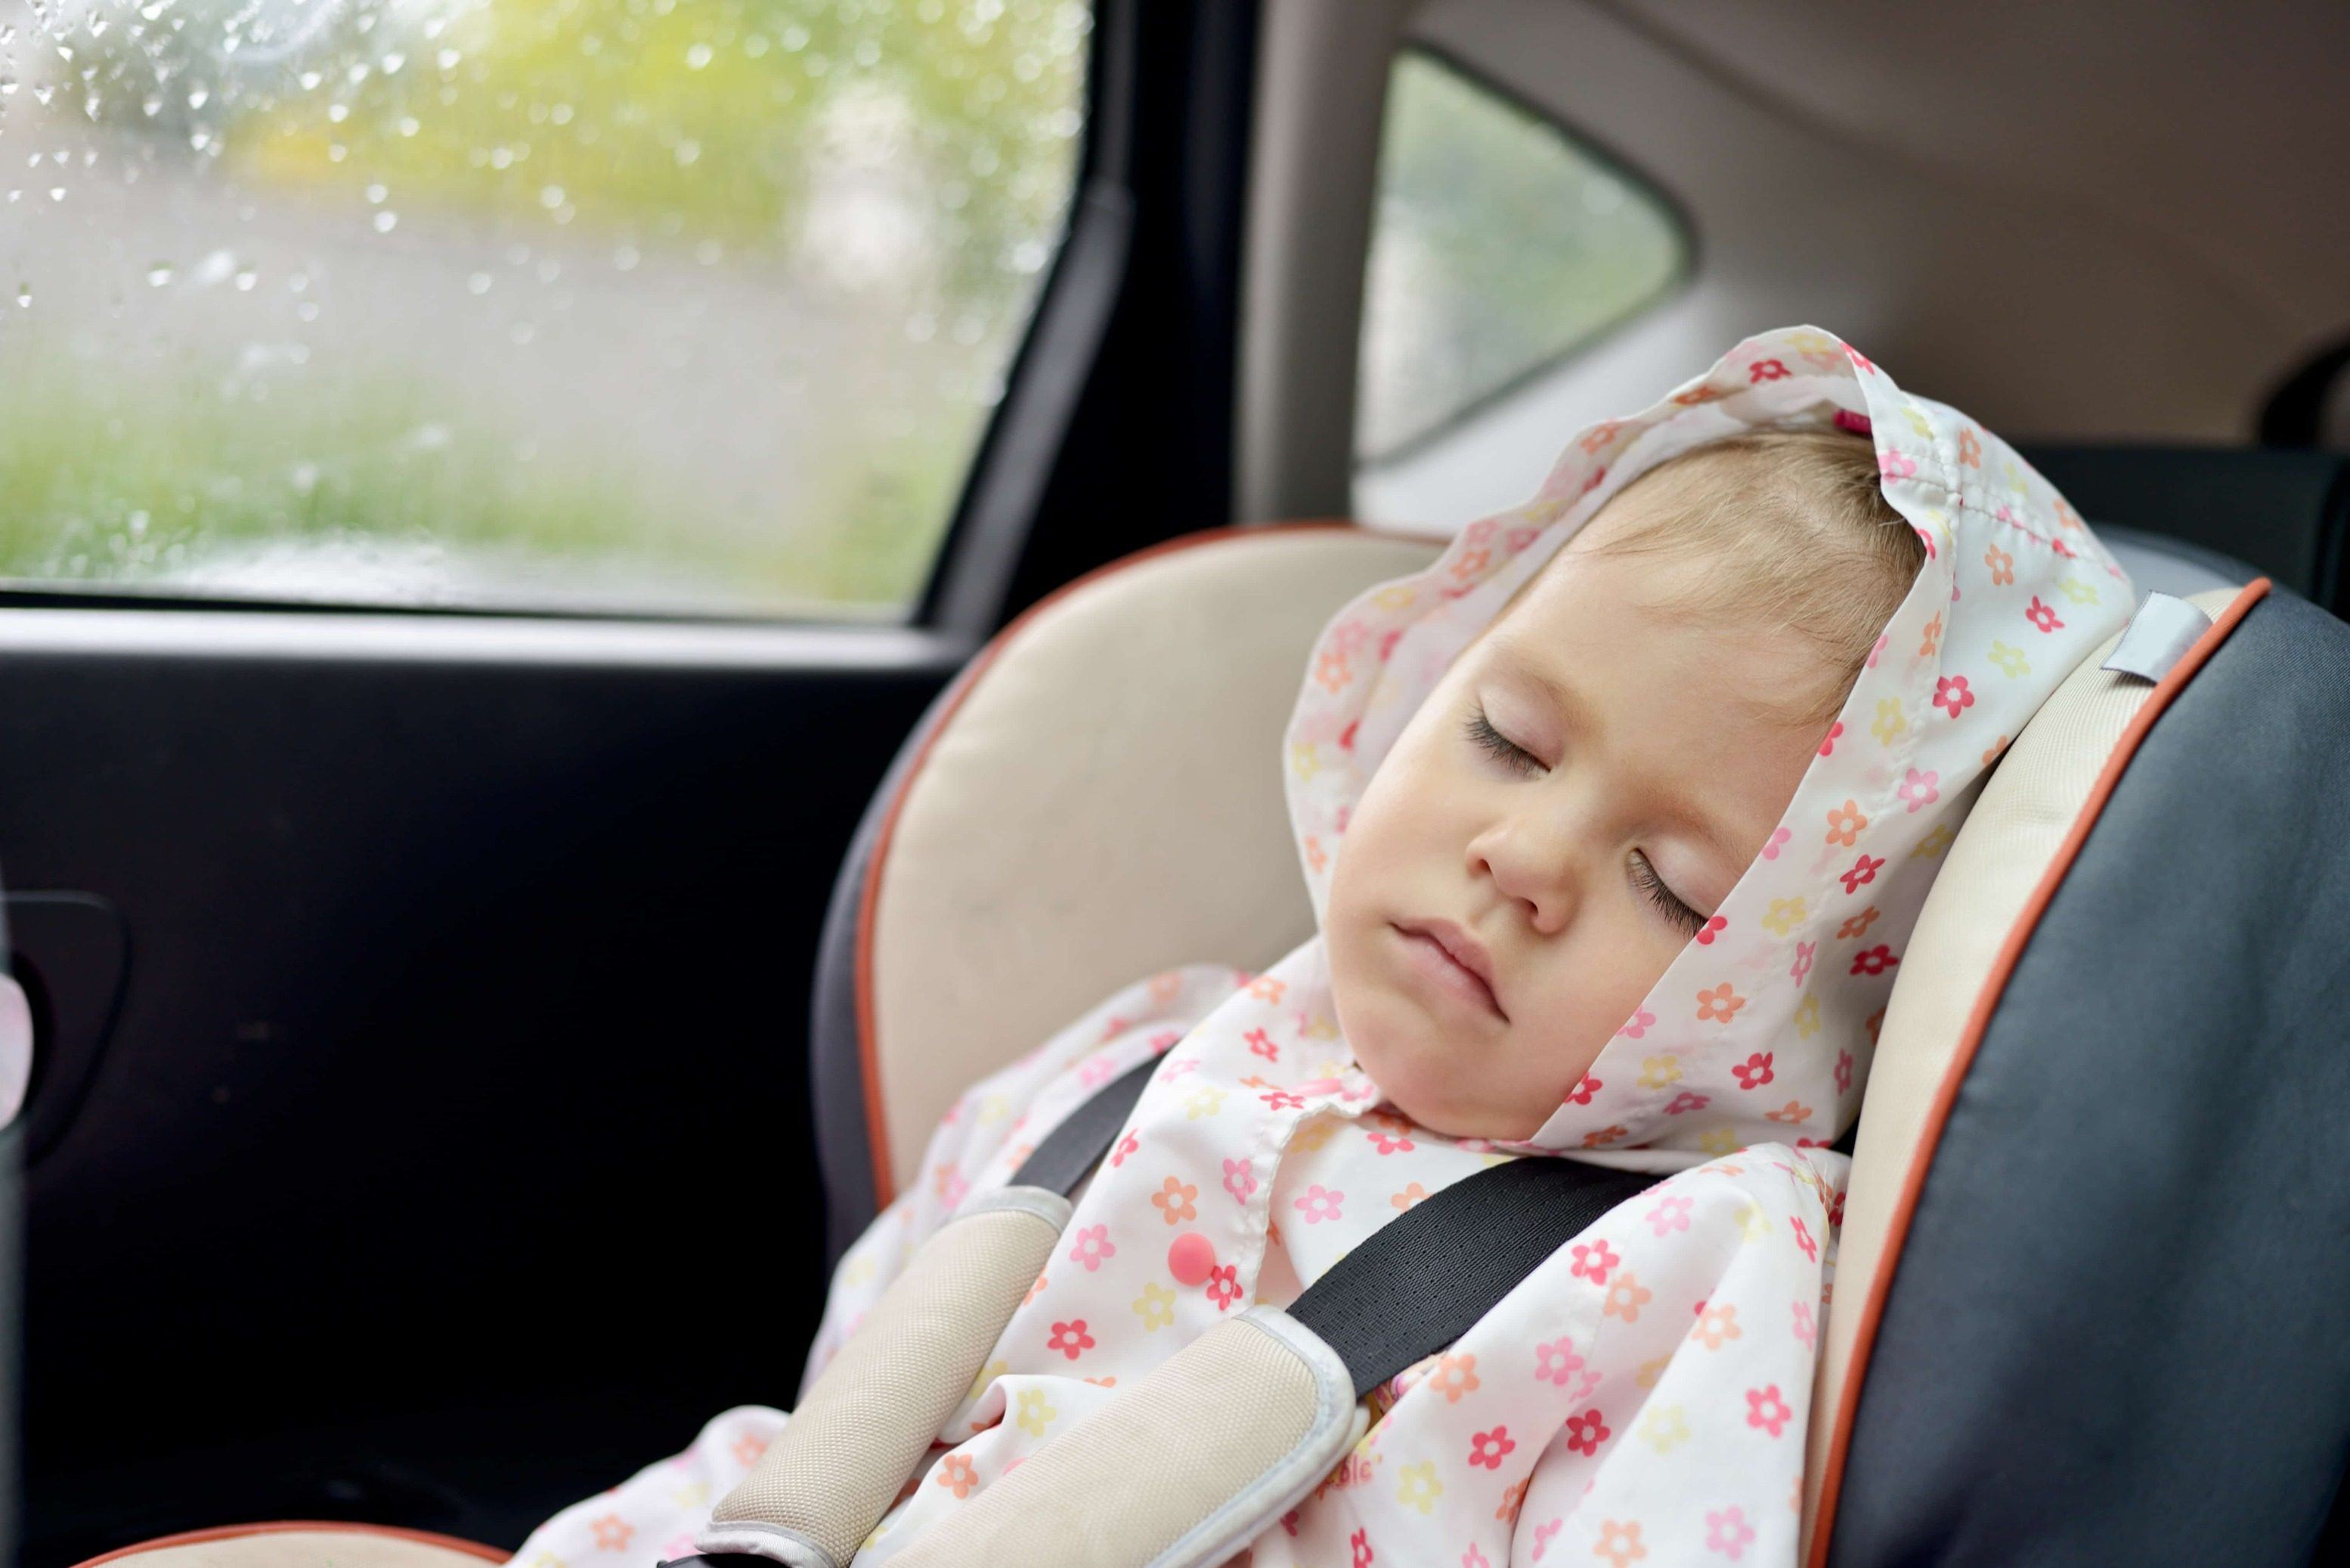 Toddler sleeping in a car seat with a raindrop-covered window in the background, amidst a relocation.